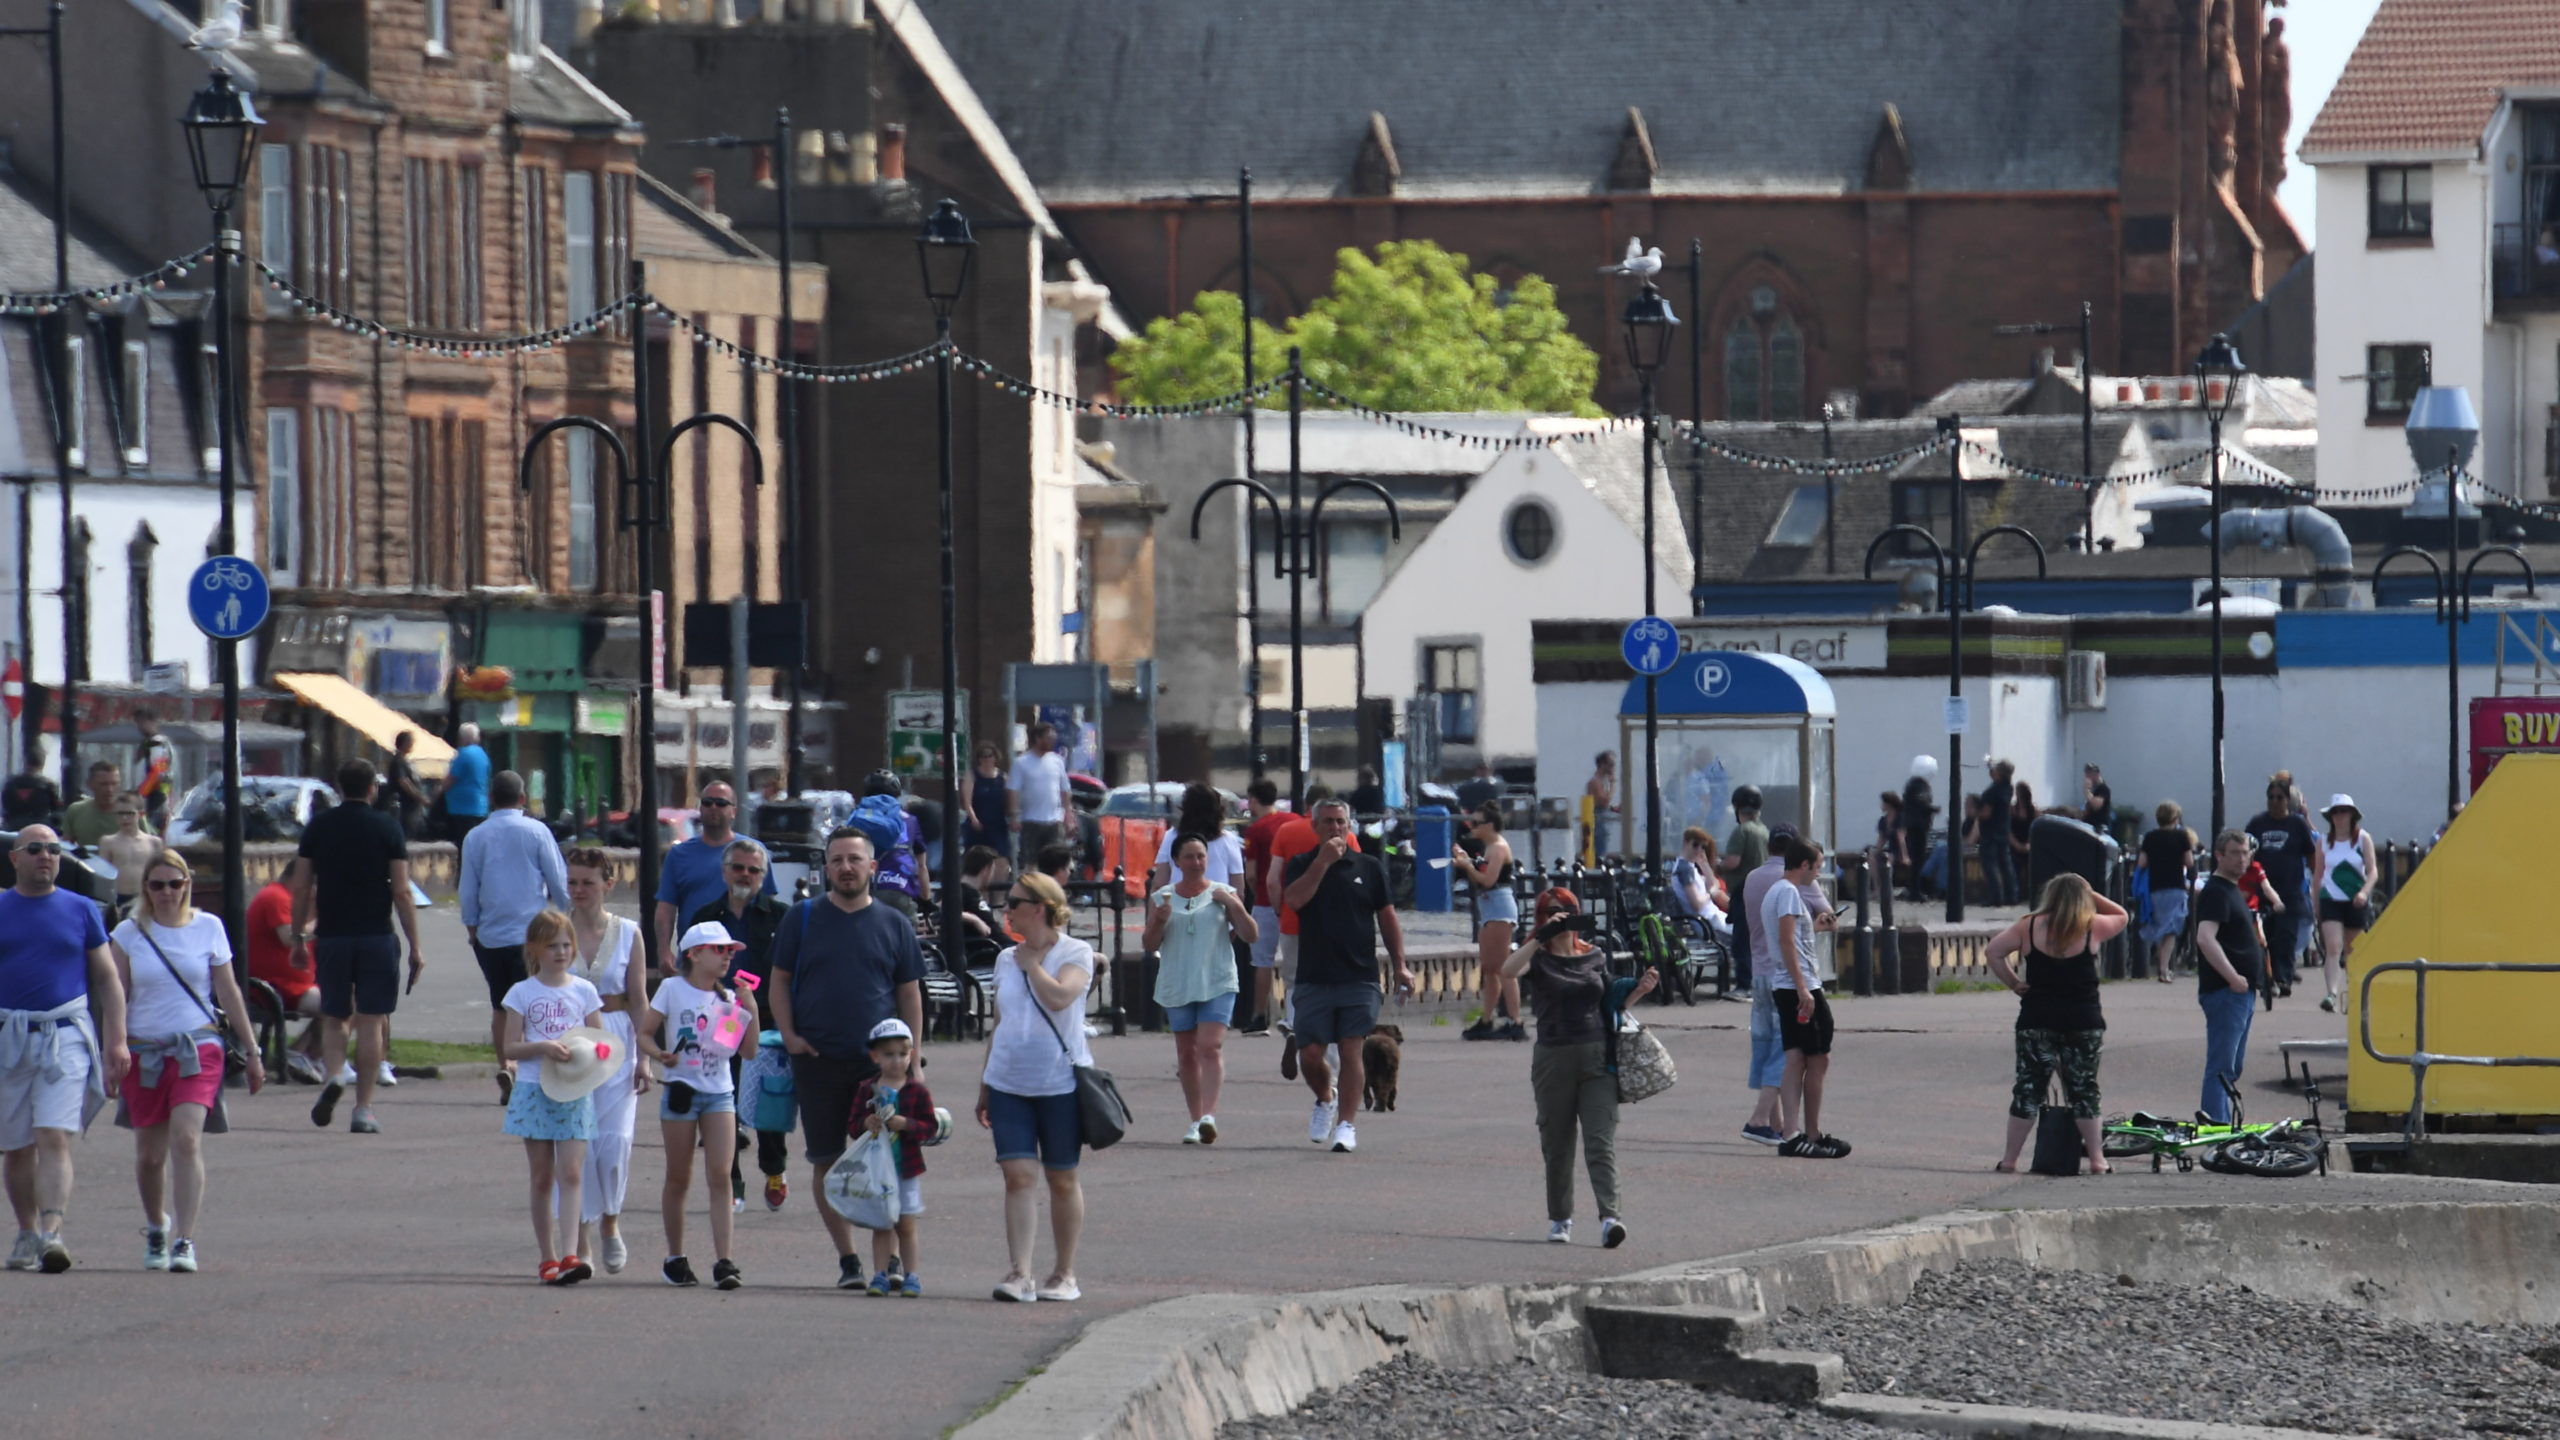 Beside the sea: Pedestrians took a walk down Largs waterfront.